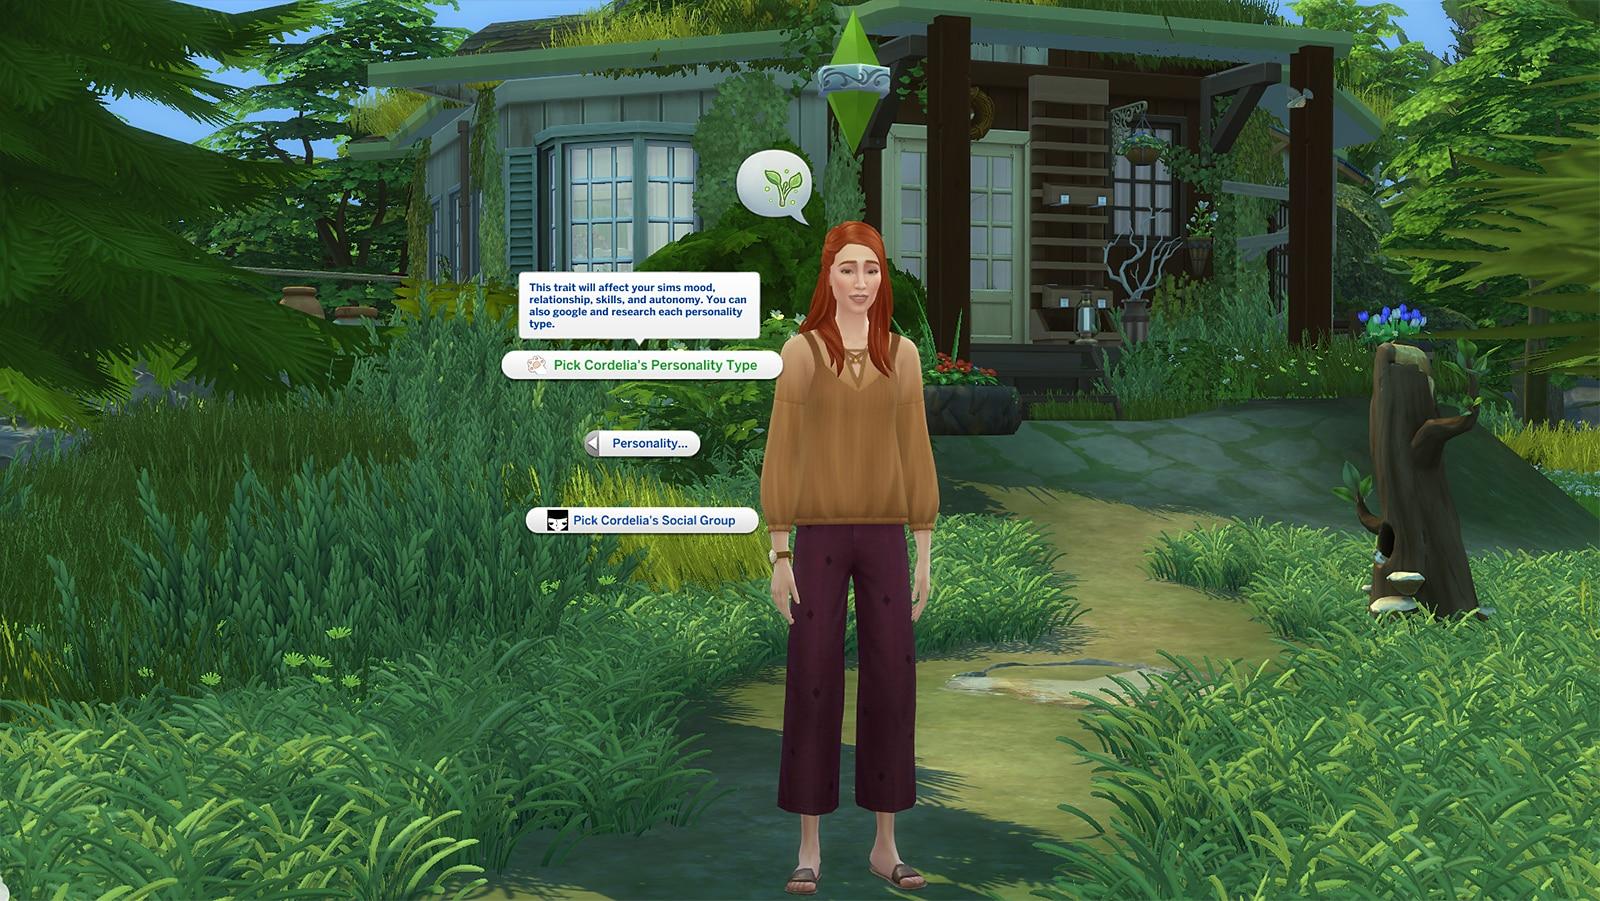 Best The Sims 4 cheats – how to get infinite money, make 'instant